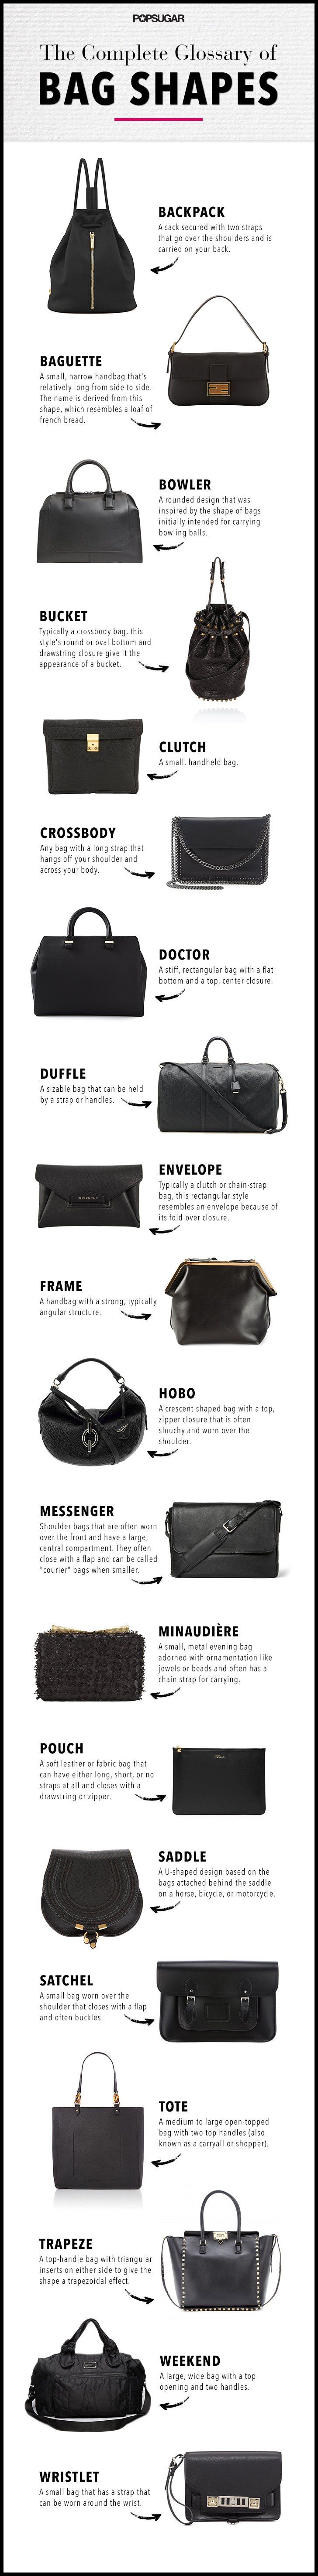 Fashion infographic : The Complete Glossary of Bag Shapes ...